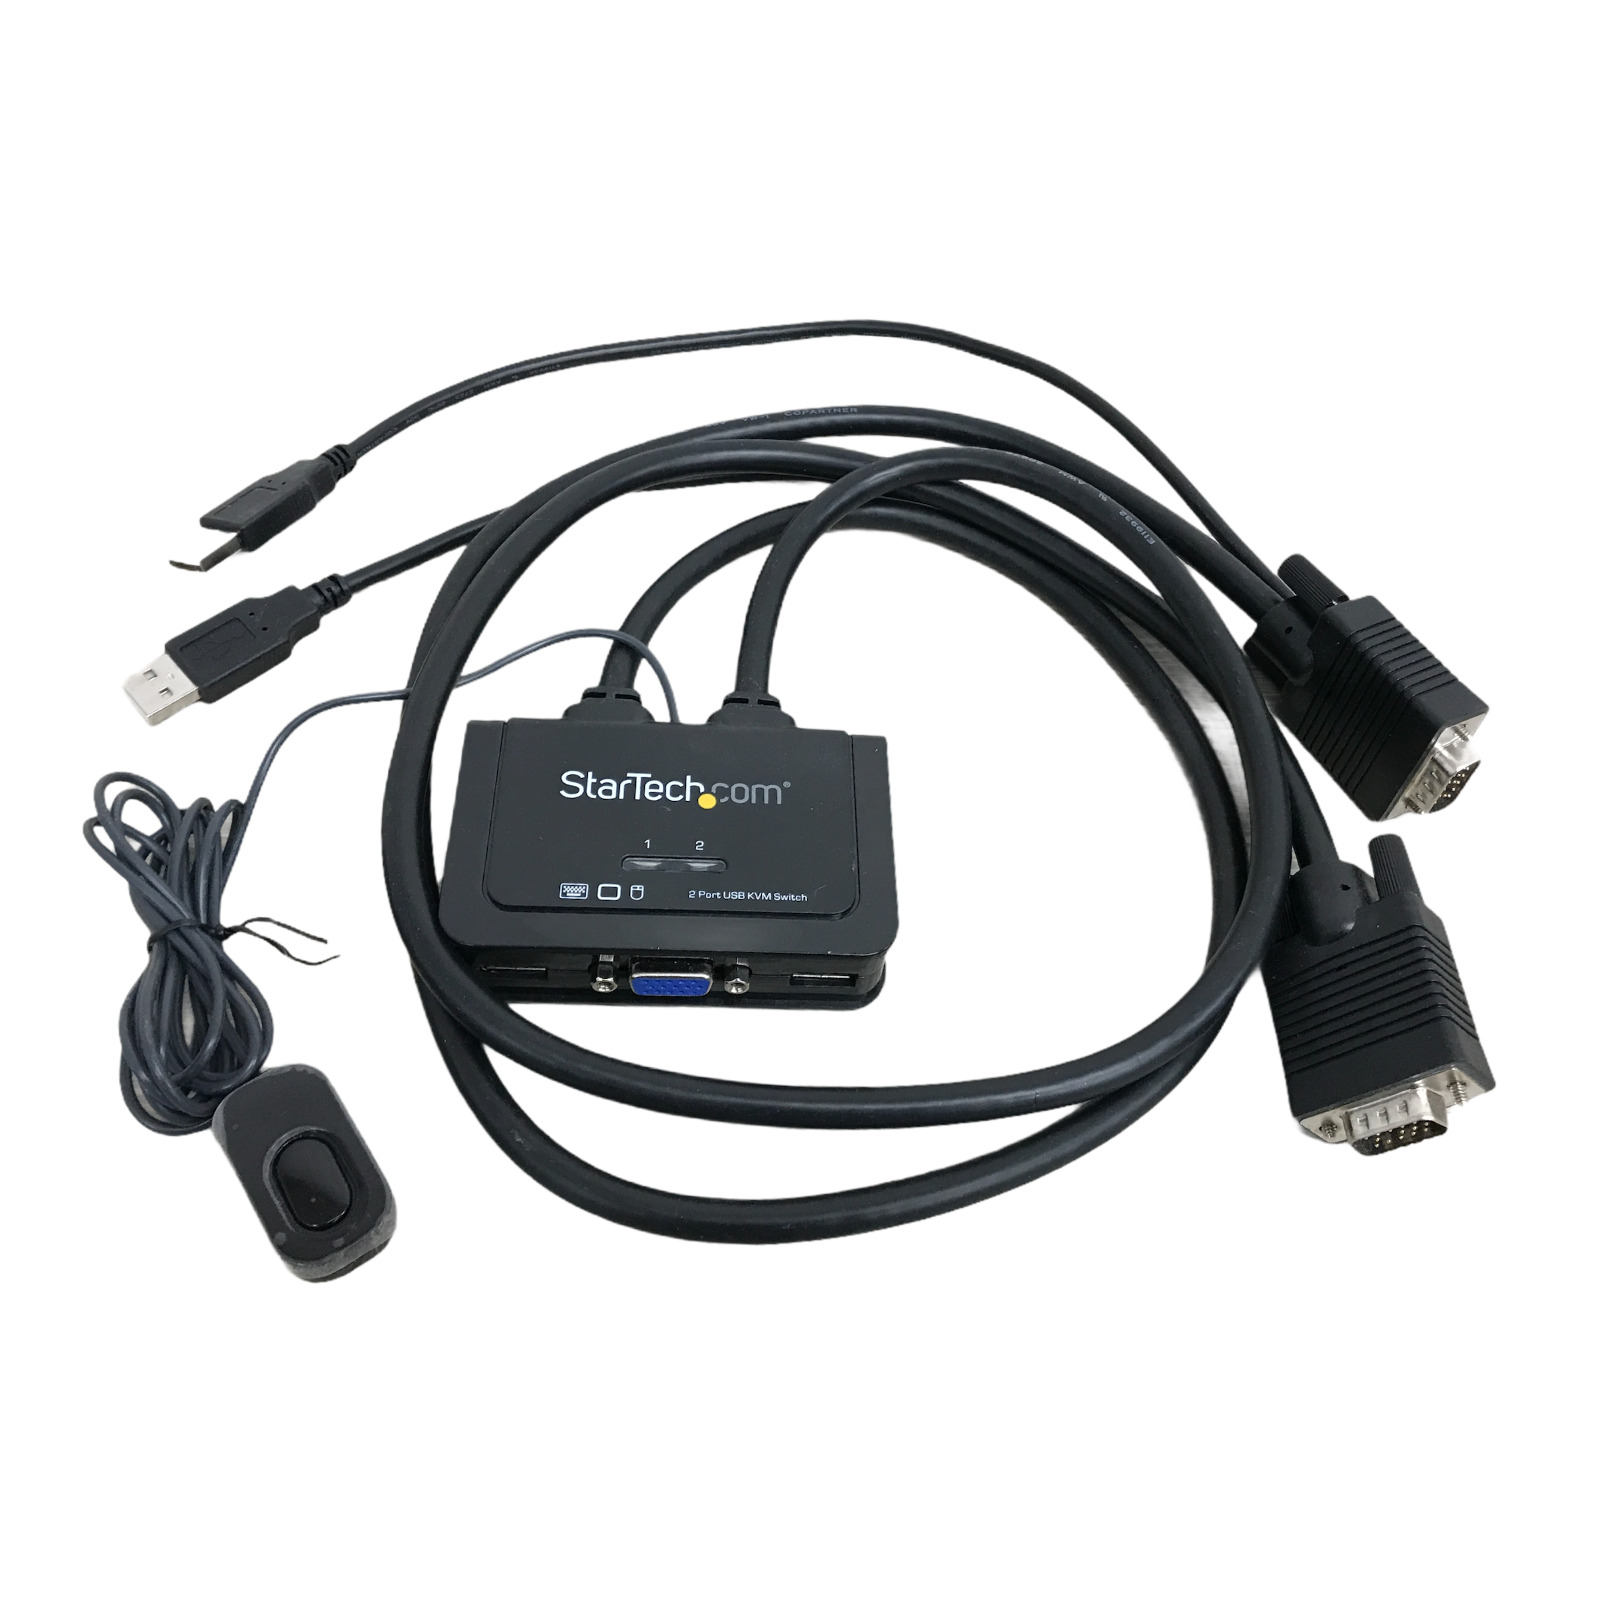 Startech SV211USB 2 Port USB VGA Cable KVM Switch Powered with Remote